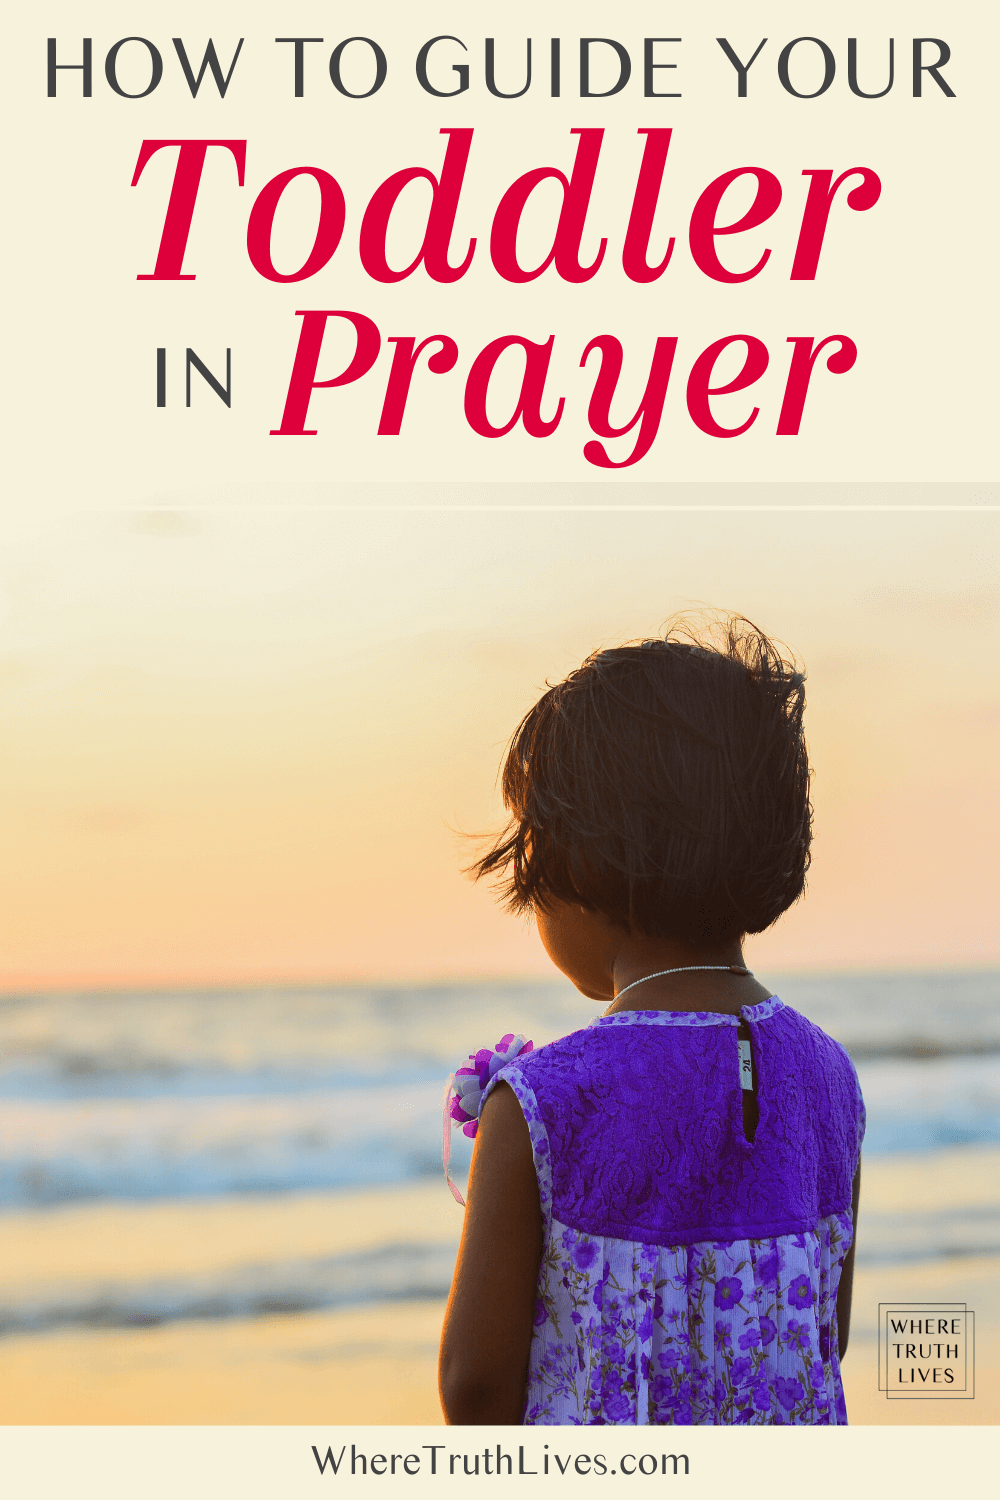 Toddler prayer is wonderful! Here are 3 key principles that will help you pray with your toddler, plus some free printable sample prayers...